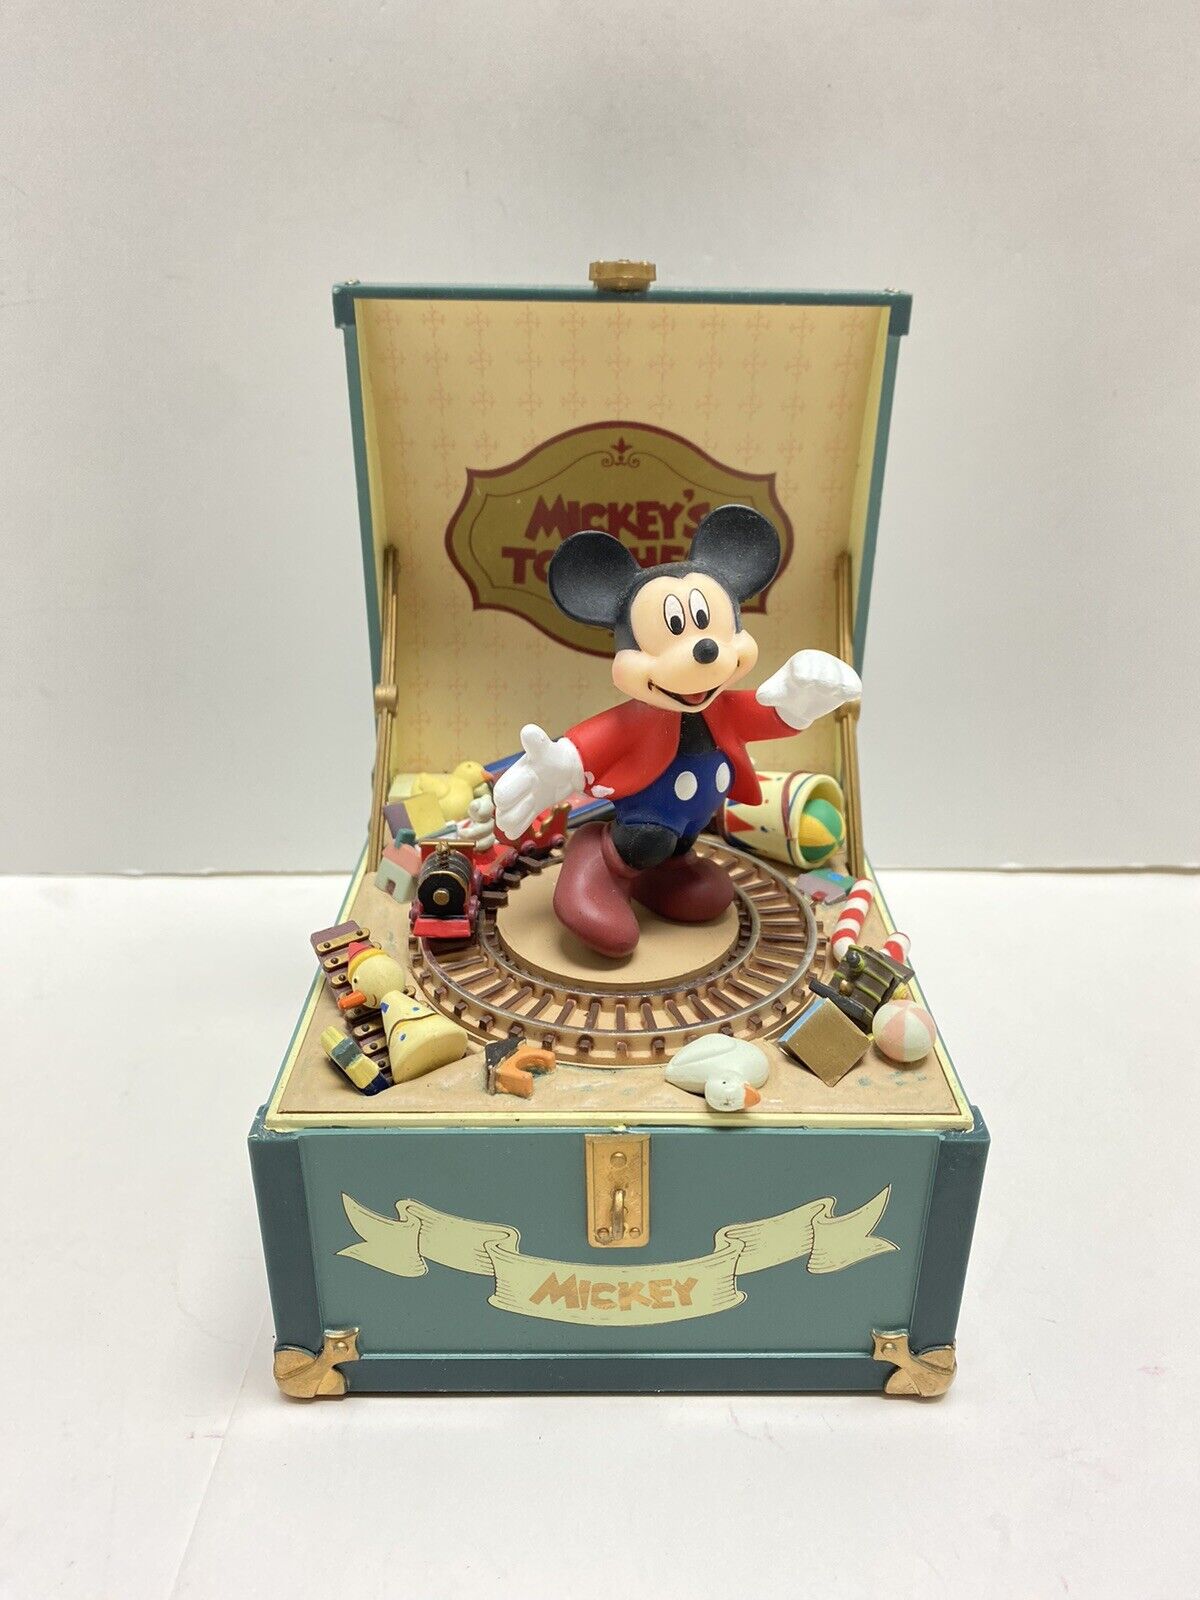 Vintage Schmid Mickey Mouse Toy Chest Music Box Plays “Toyland”